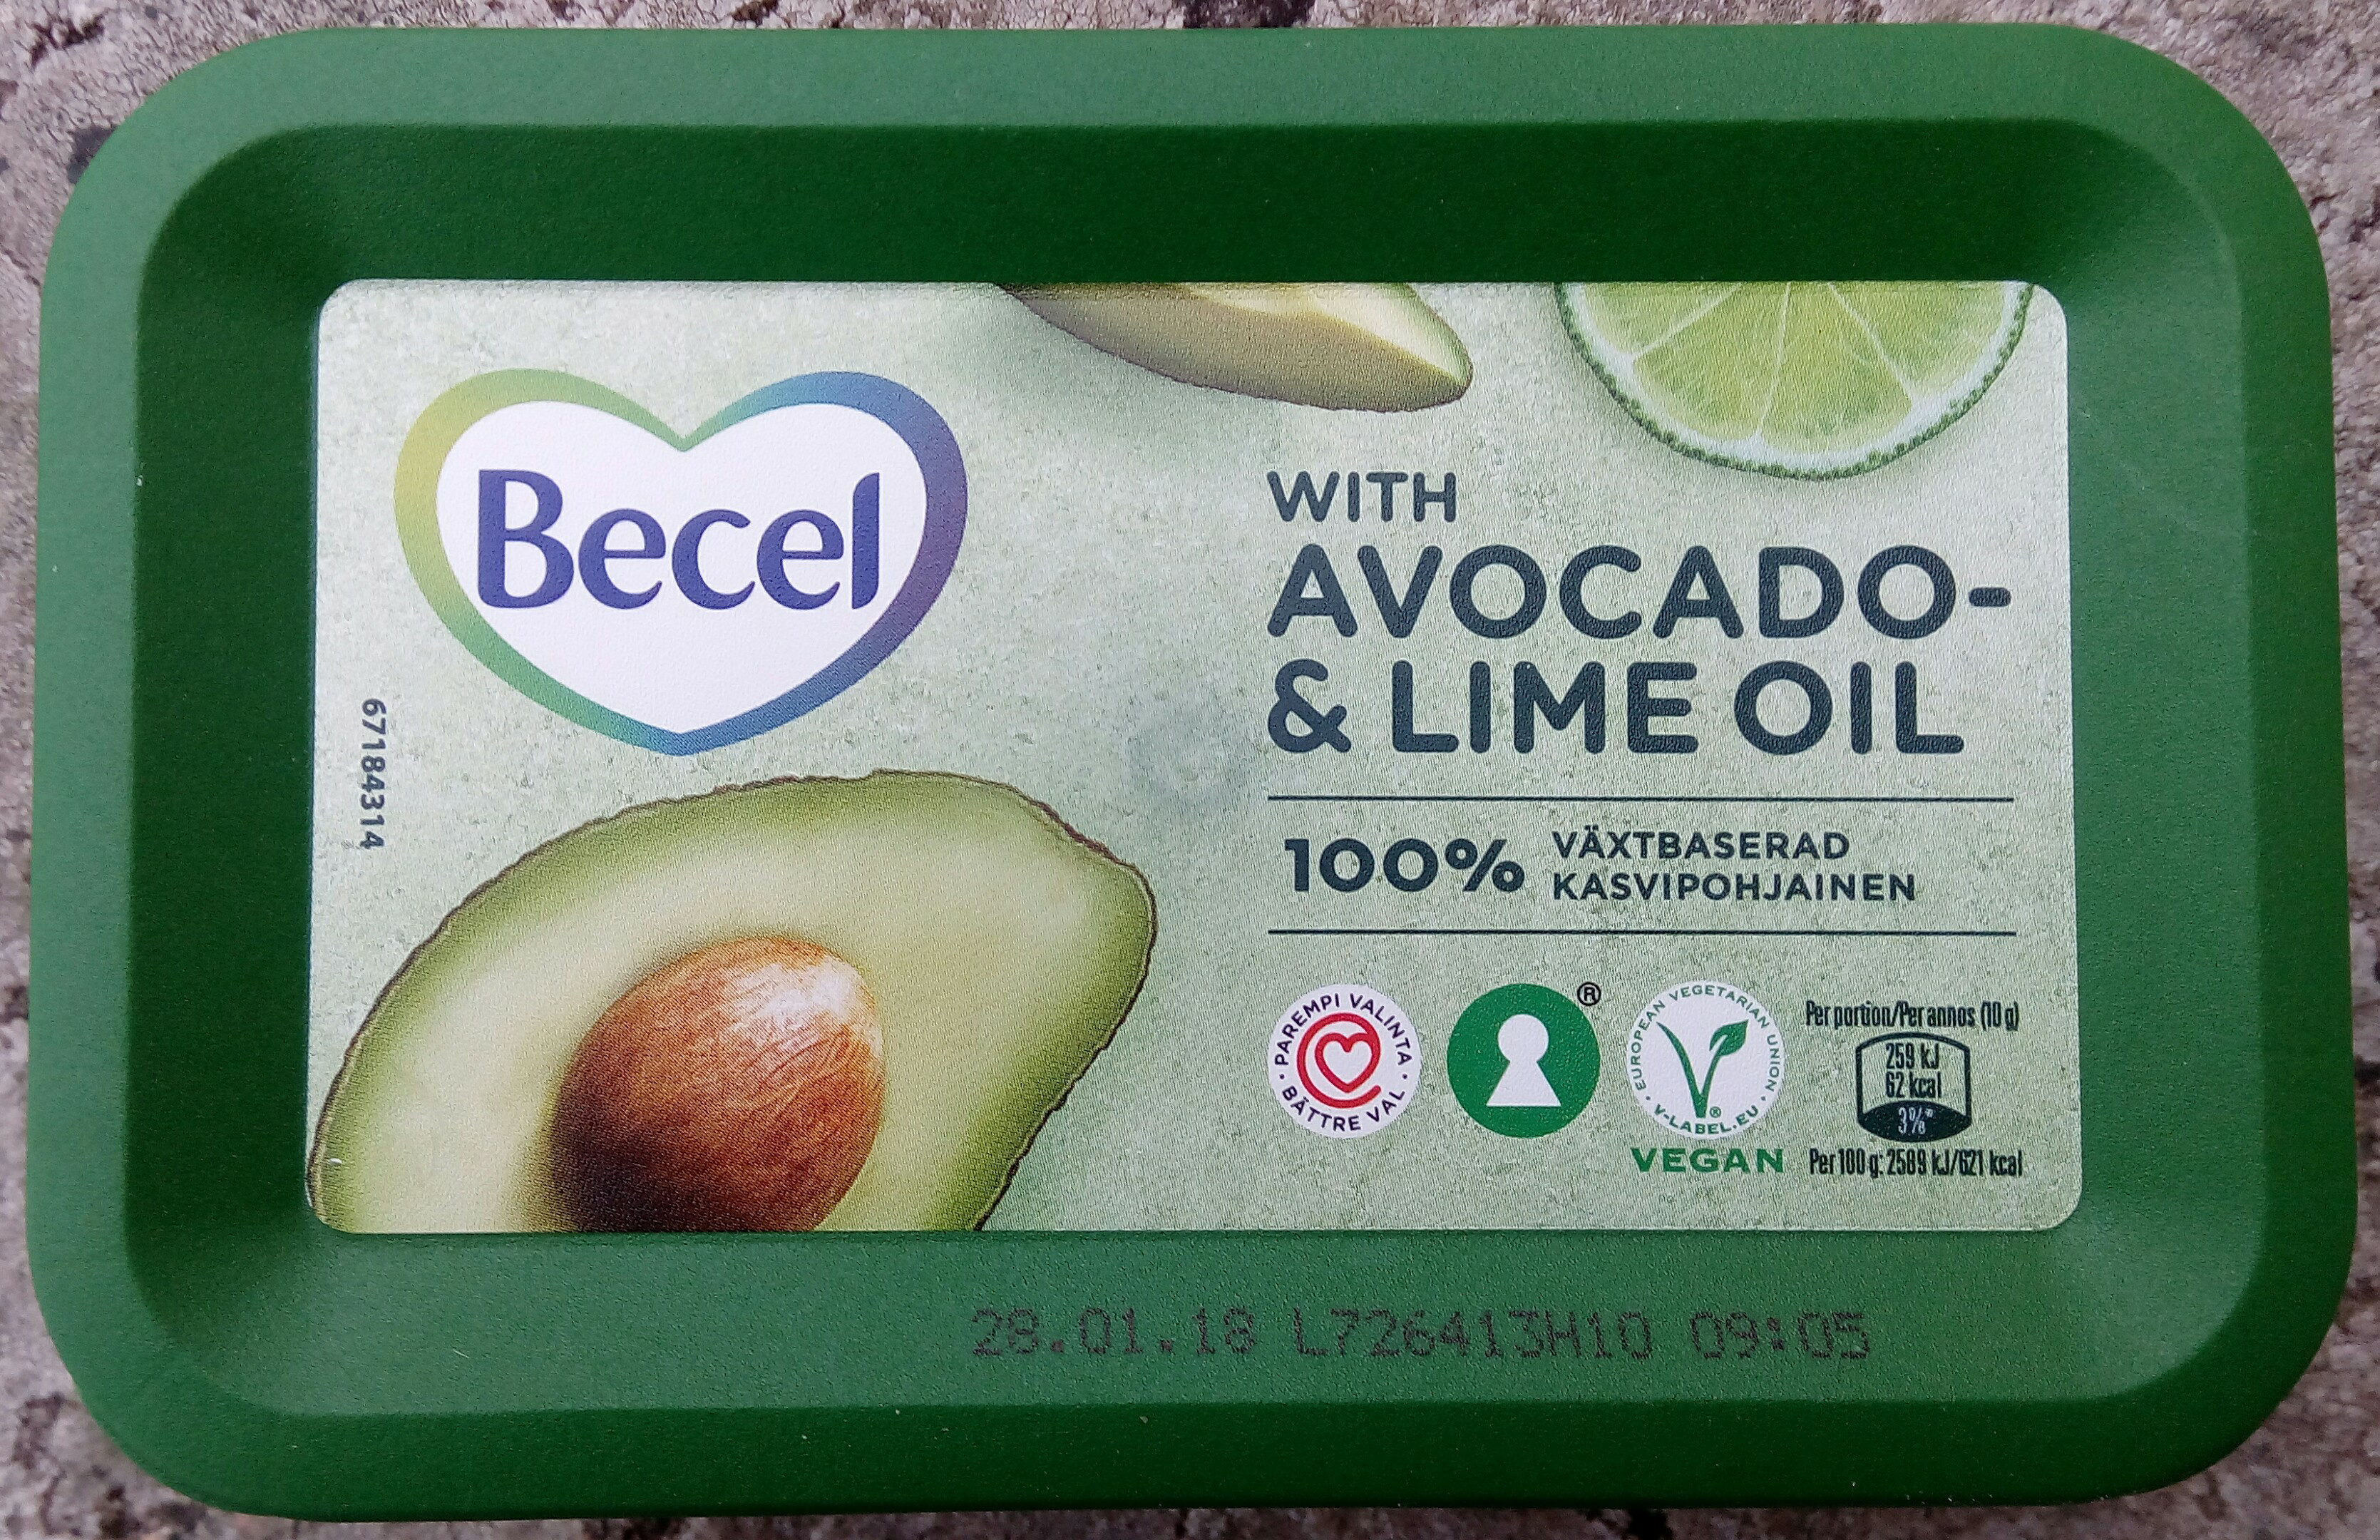 Becel with Avocado- & Lime Oil - Produkt